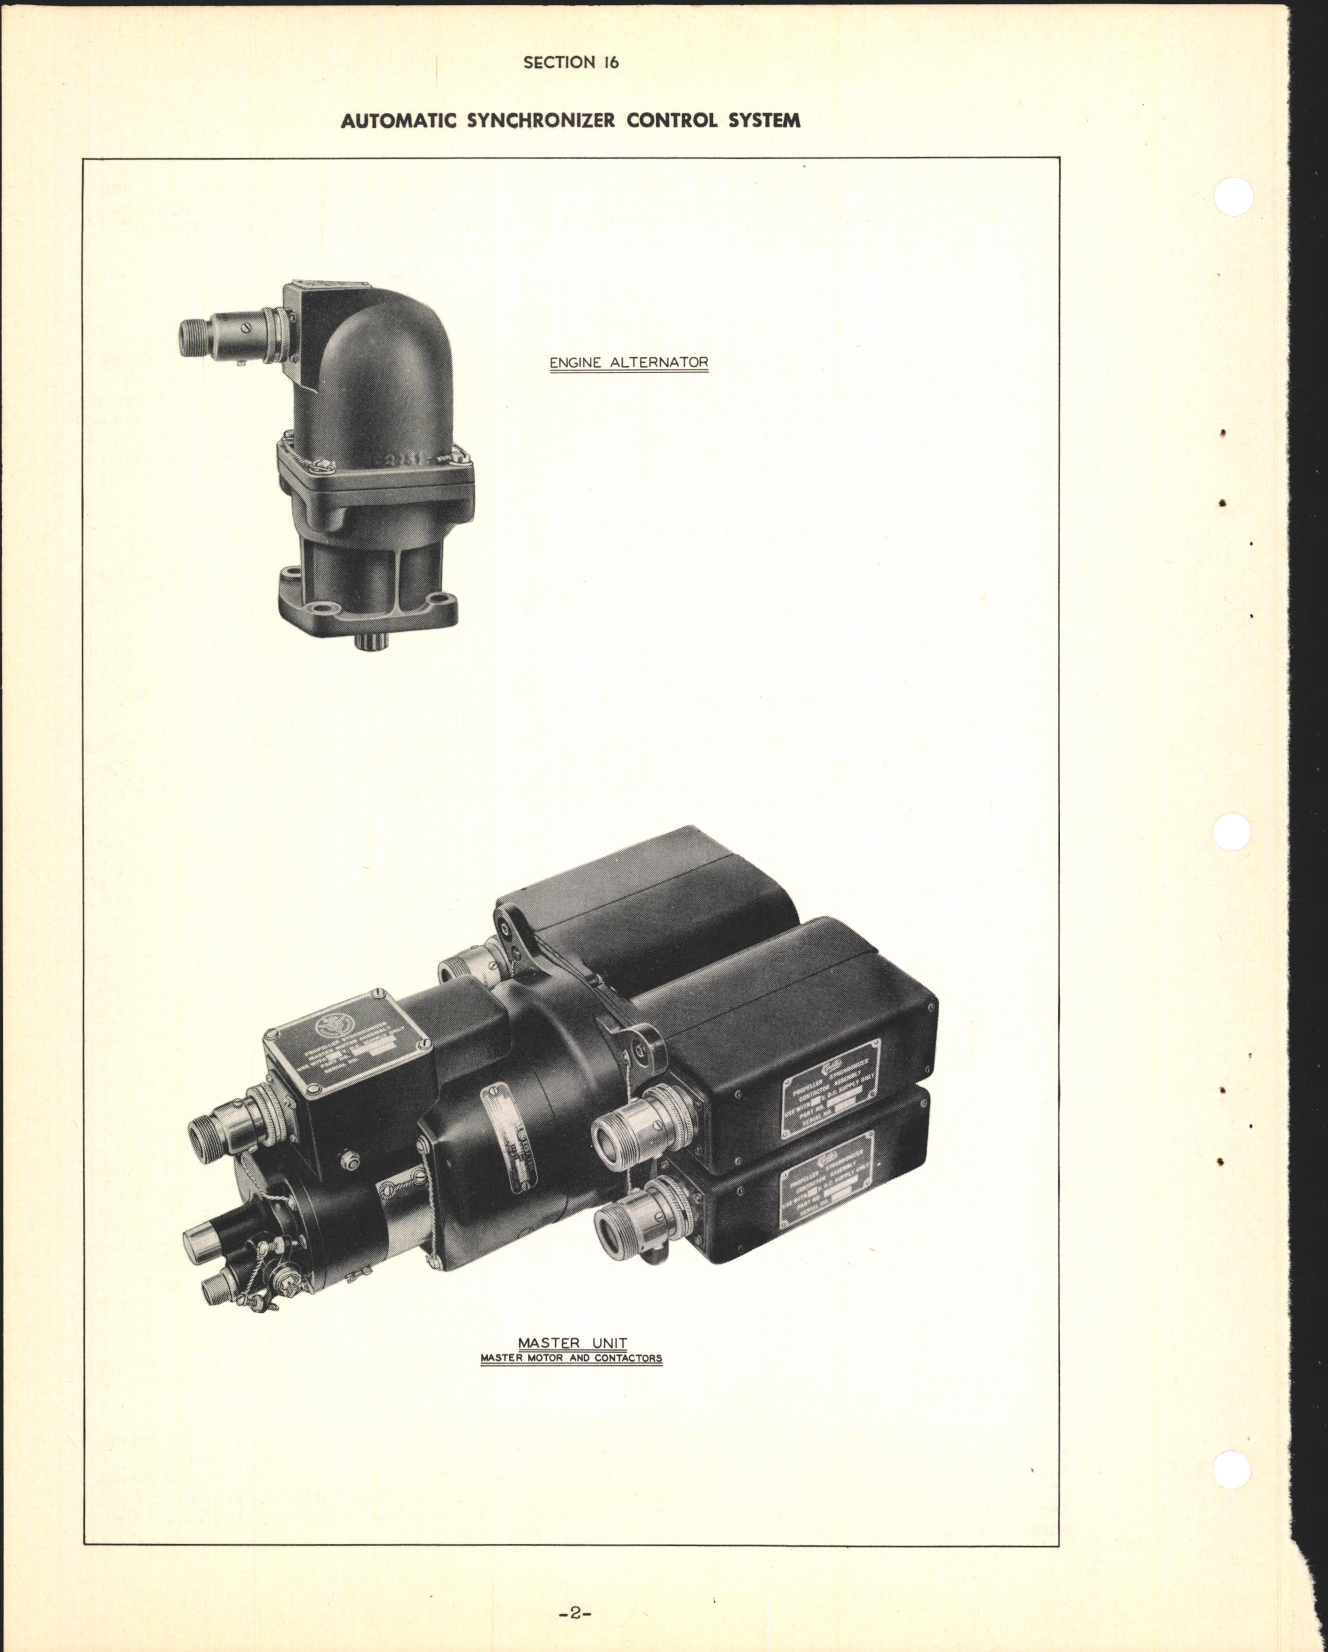 Sample page 4 from AirCorps Library document: Section 16 - Automatic Synchronizer Control System